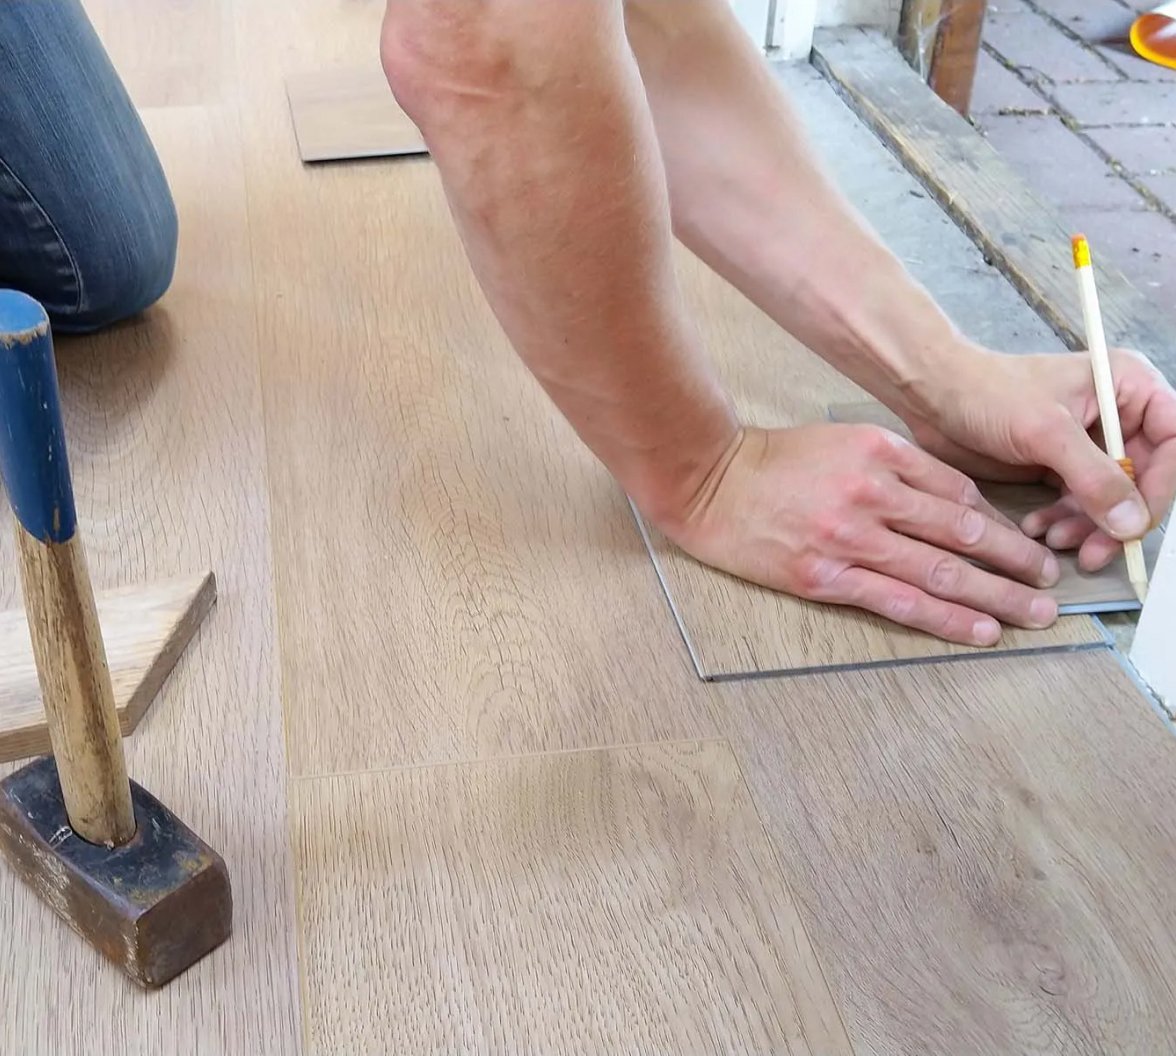 You should choose a professional for new flooring installation